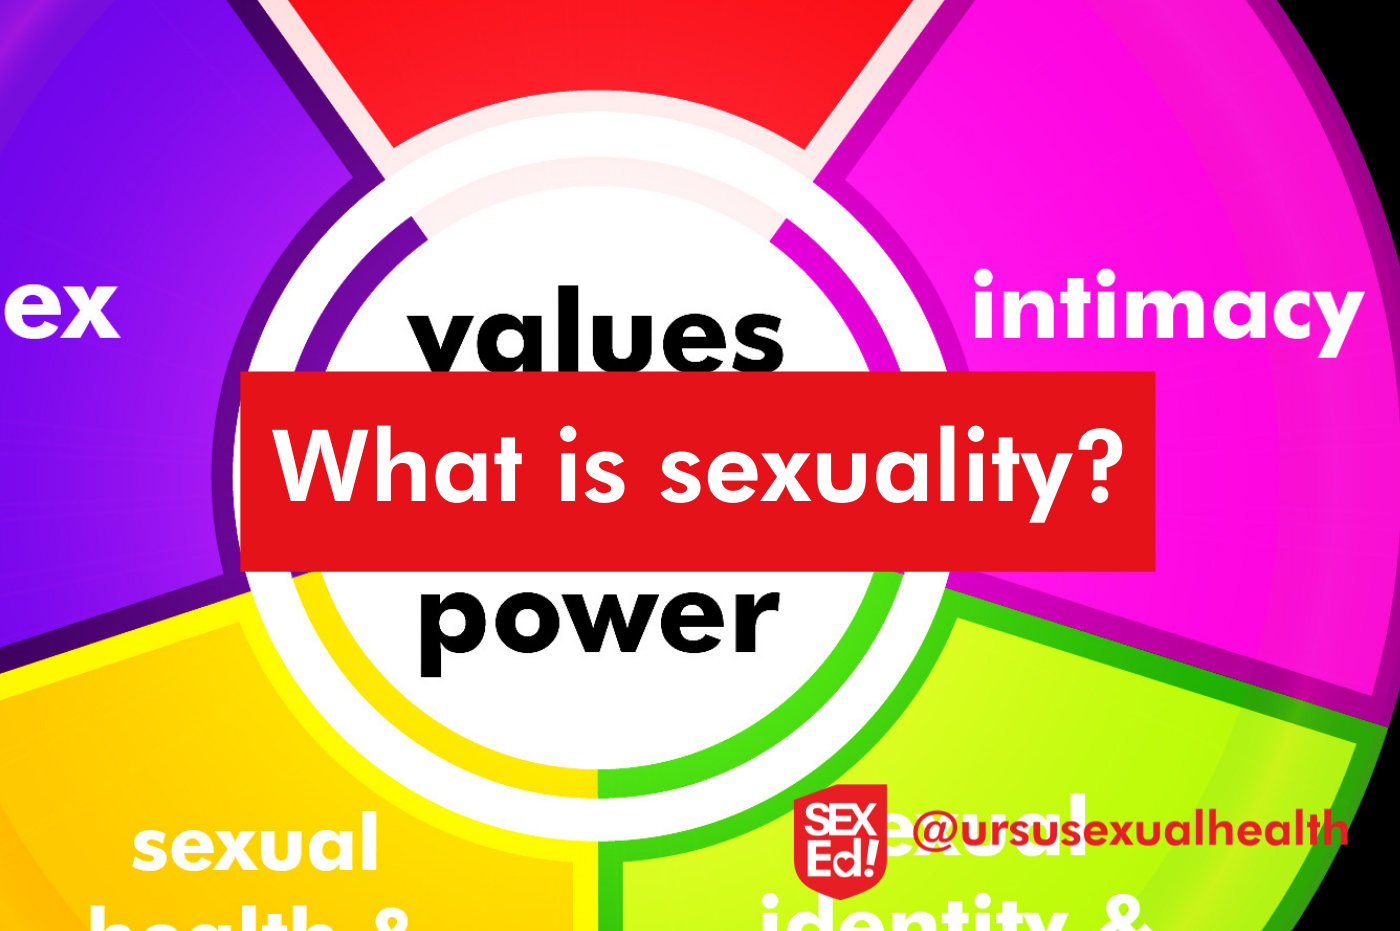 What is sexuality?